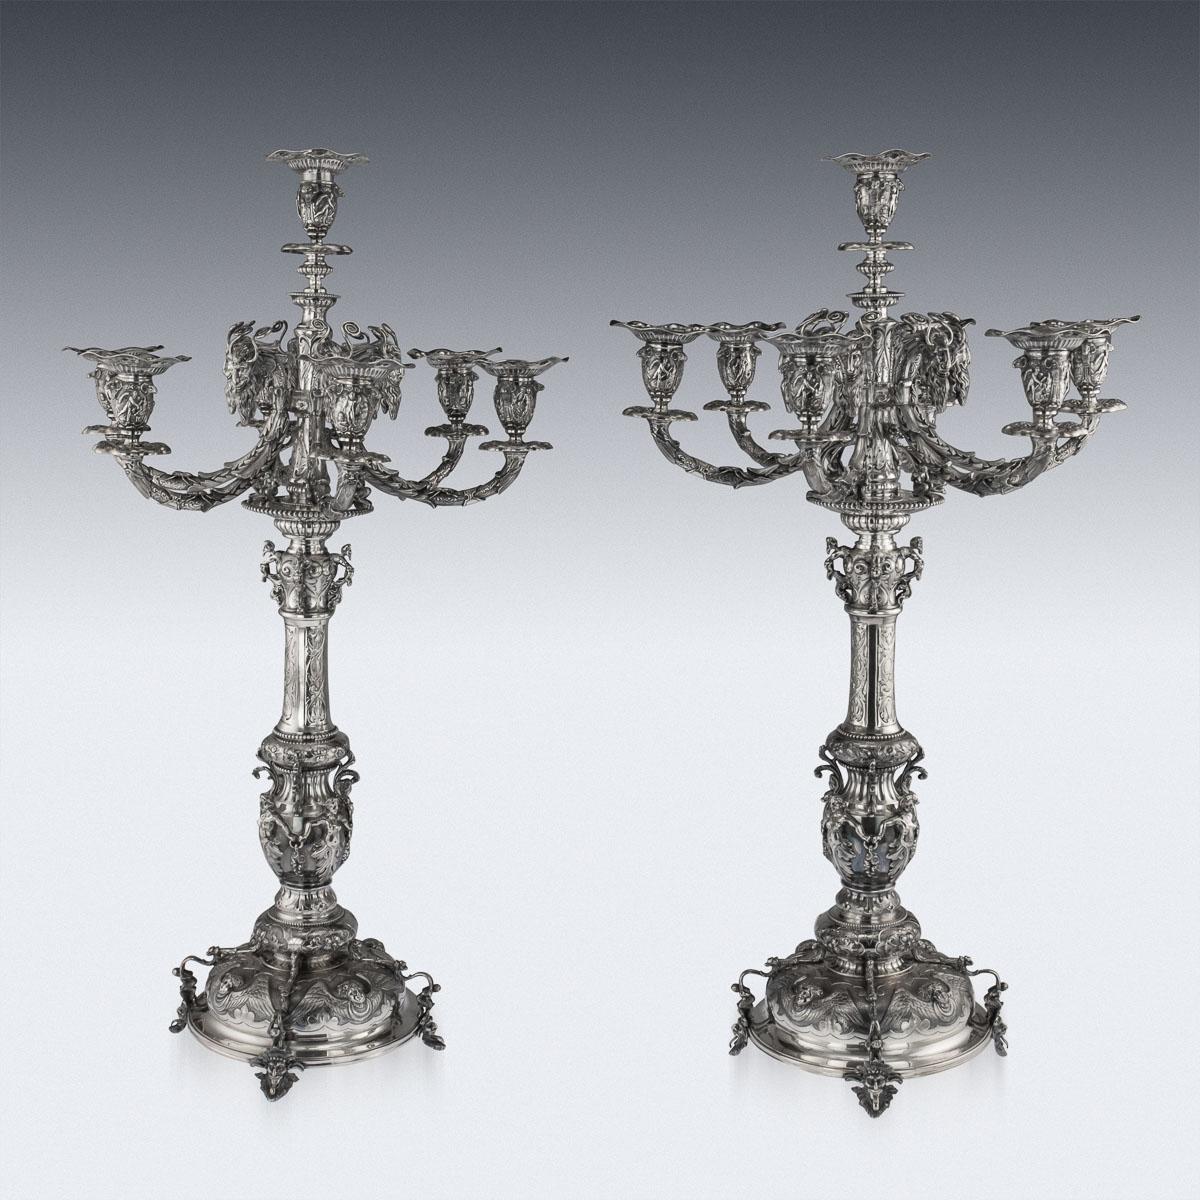 Antique 19th century Victorian exceptional & very unusual set of four solid silver candelabras. Each large seven-light and smaller four-light candelabra set with repousse neoclassical bobéches issuing from ram's head supports, decorated throughout